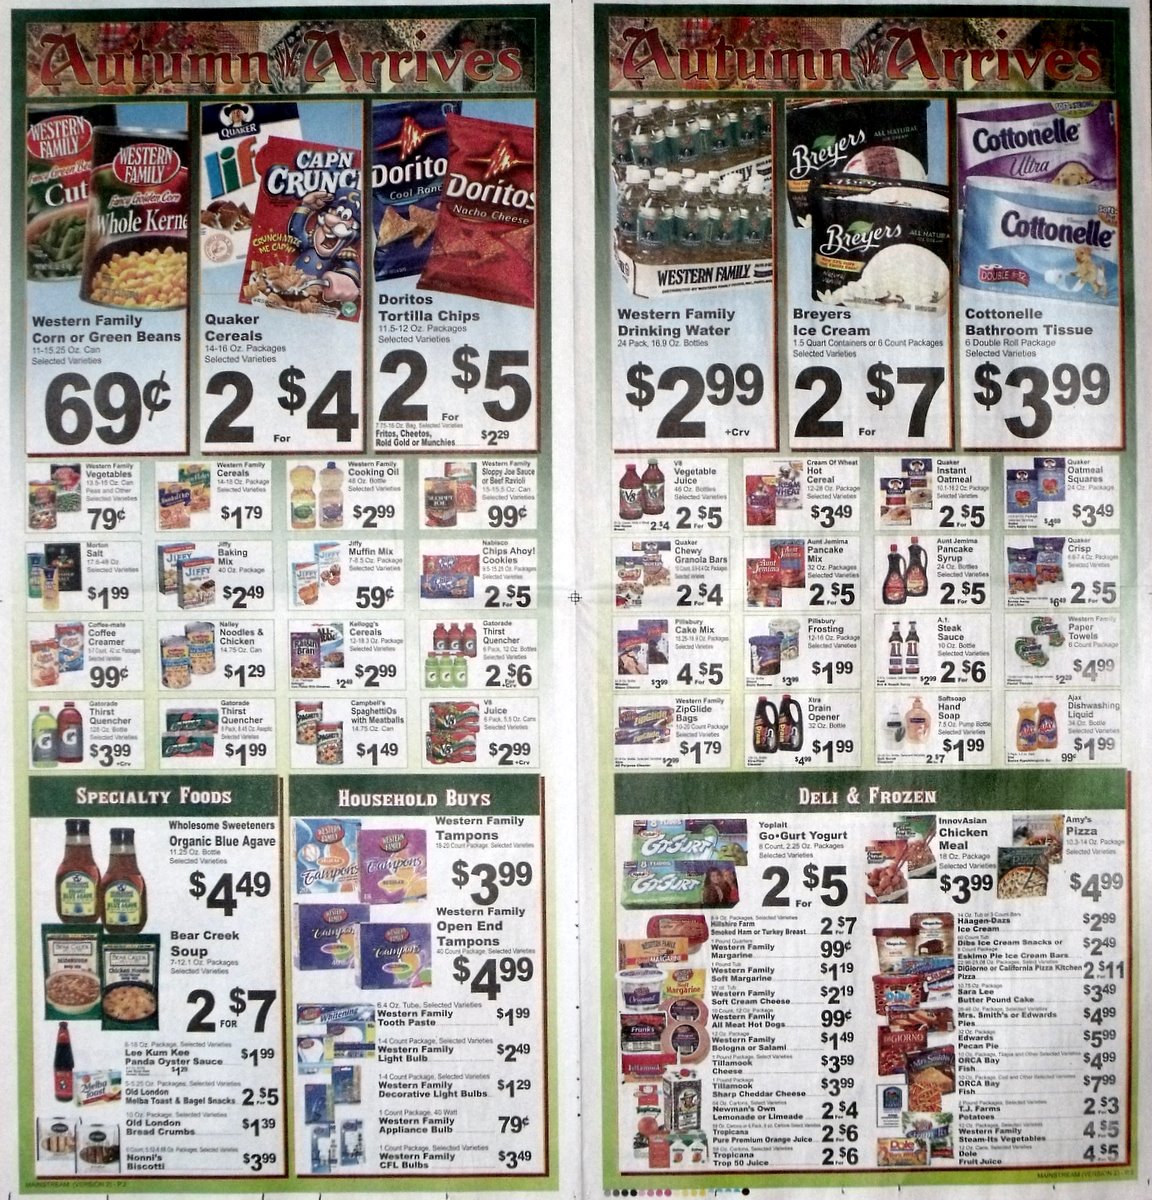 Big Trees Market Weekly Ad for September 22 - 28, 2010